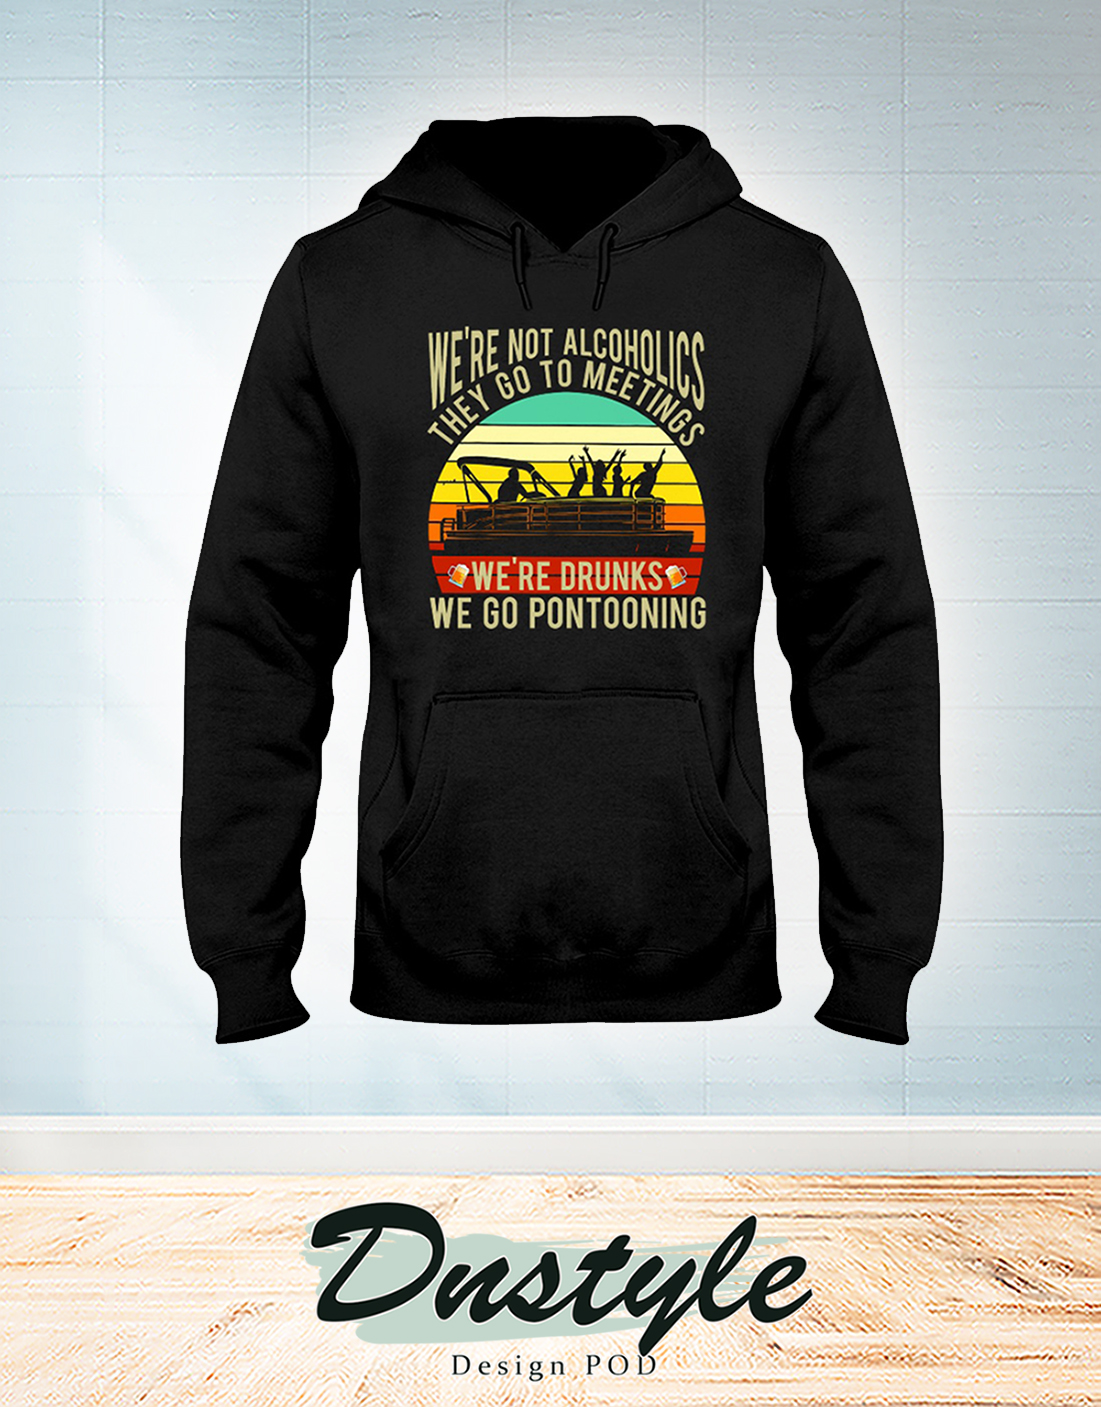 Vintage Boating we're not alcoholics they go to meetings hoodie